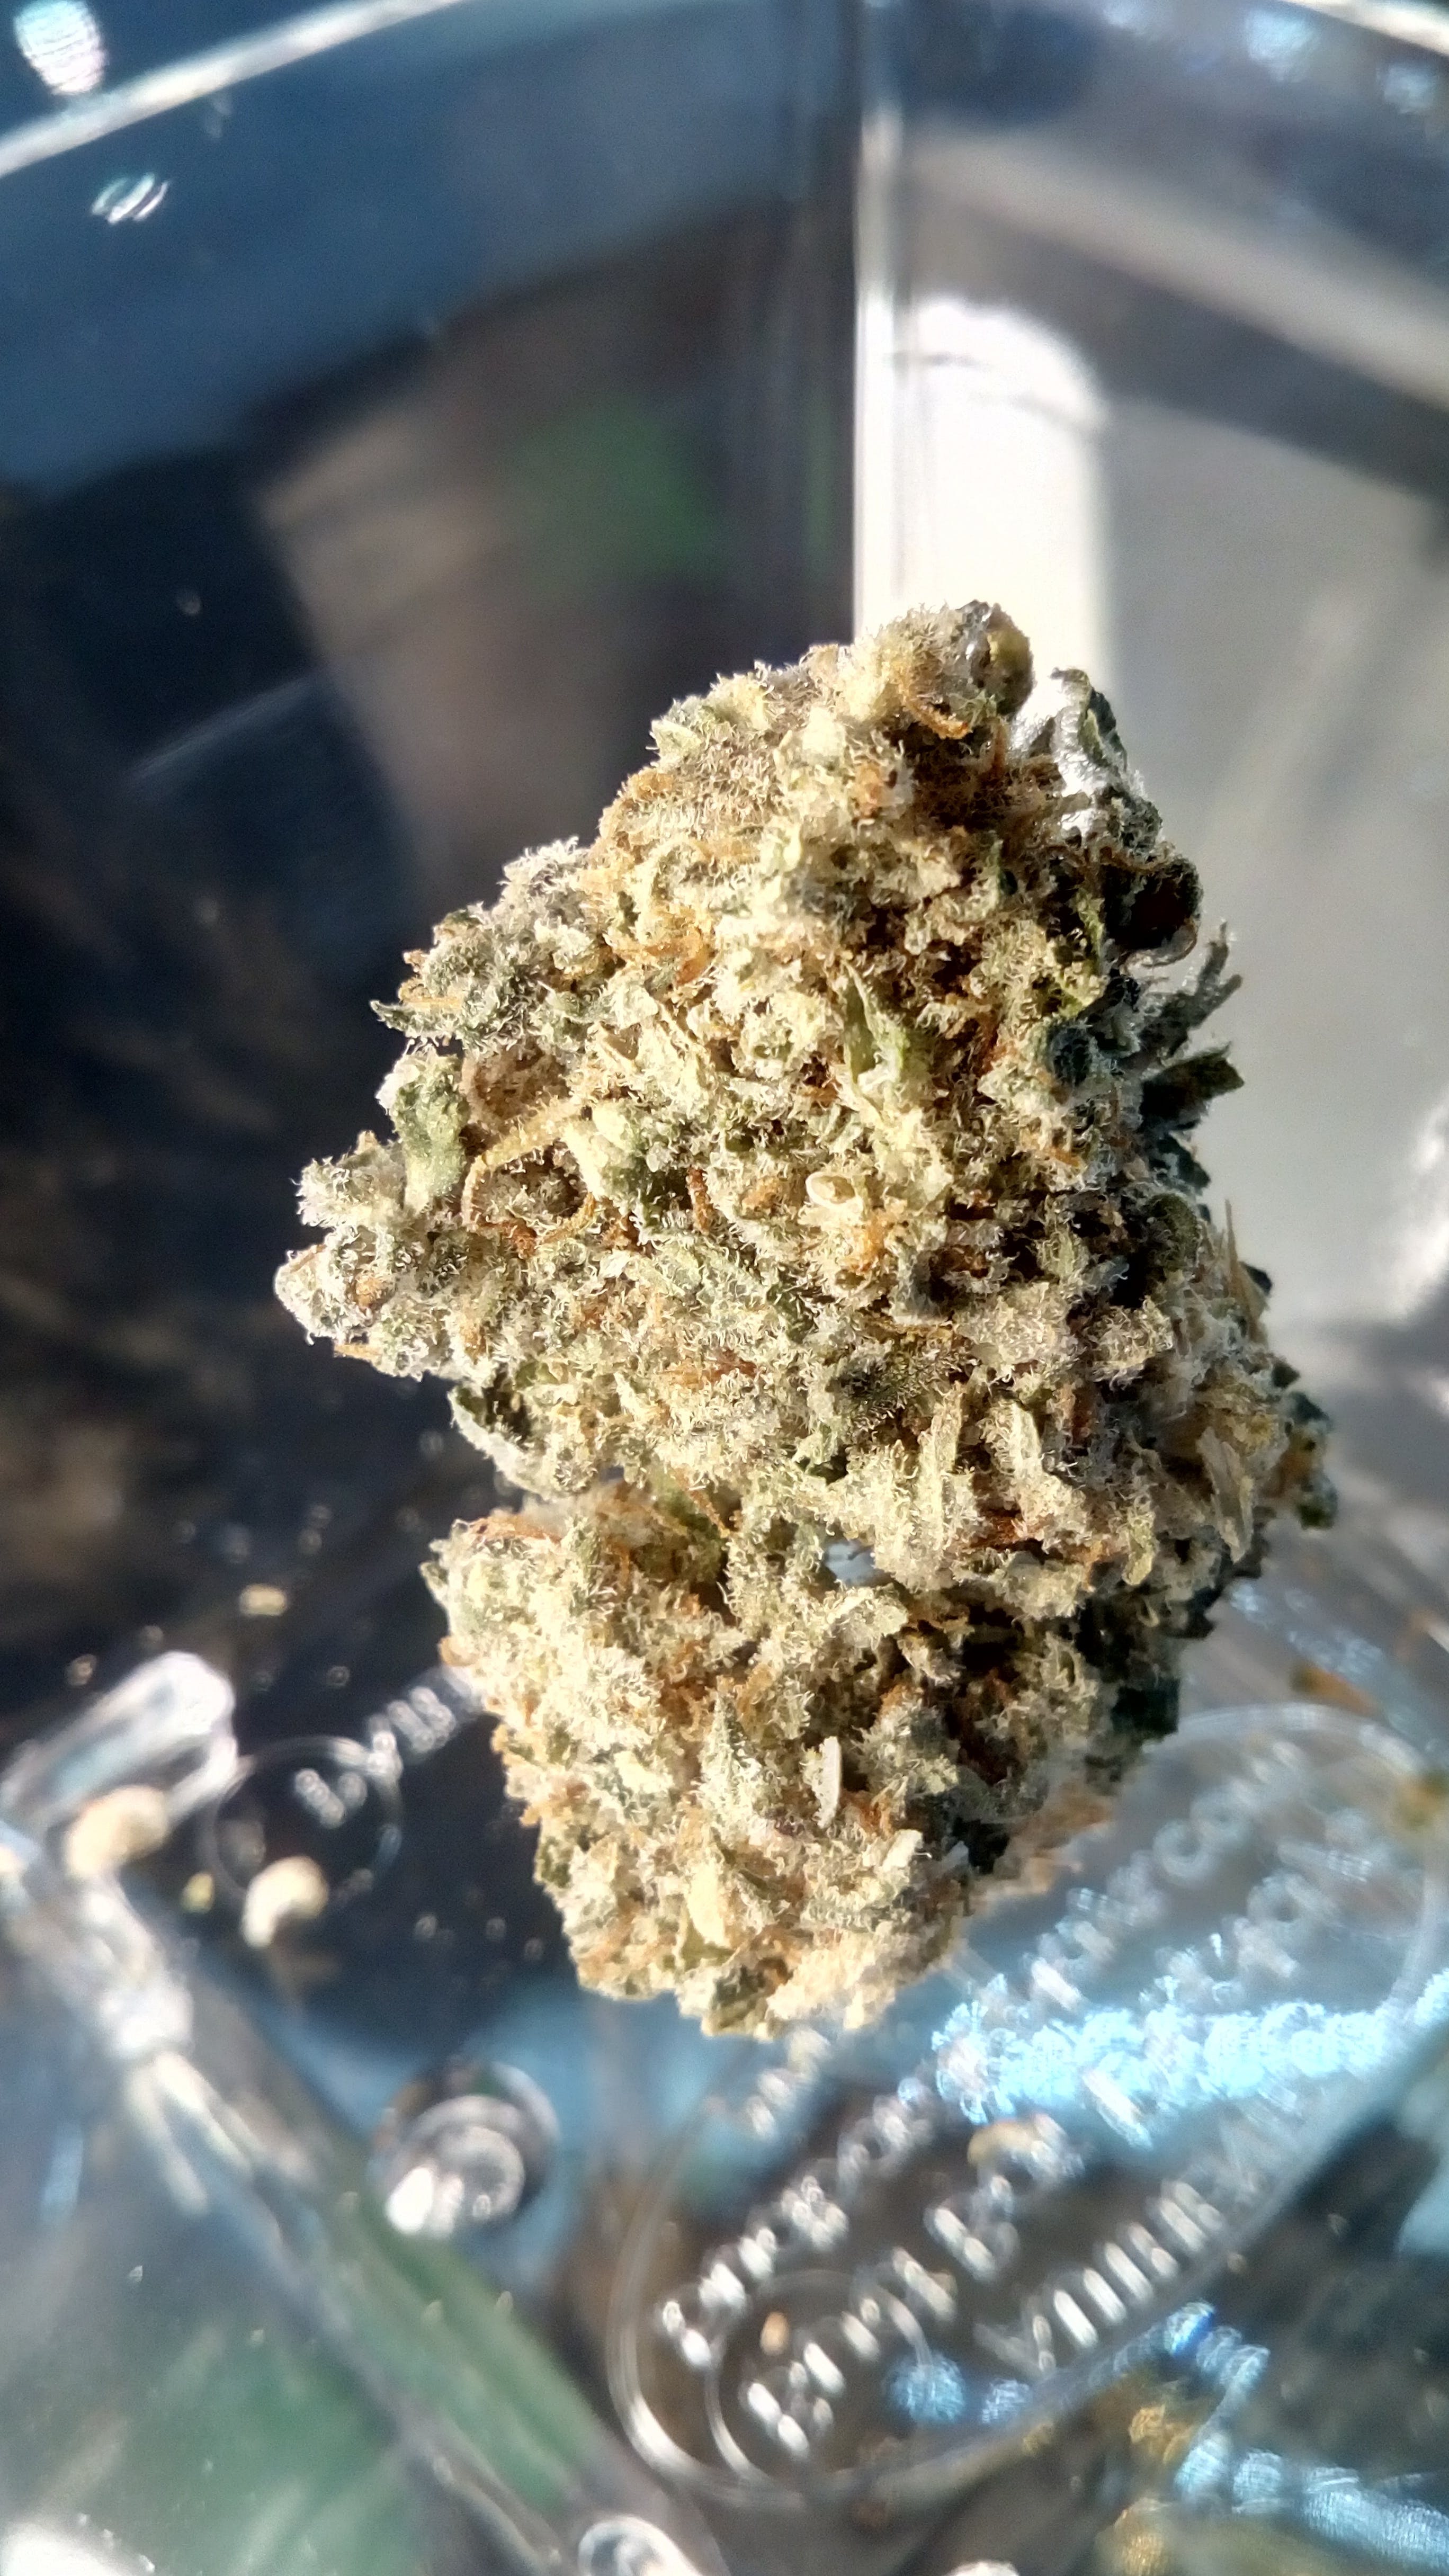 indica-royal-berry-thc-18-31-25